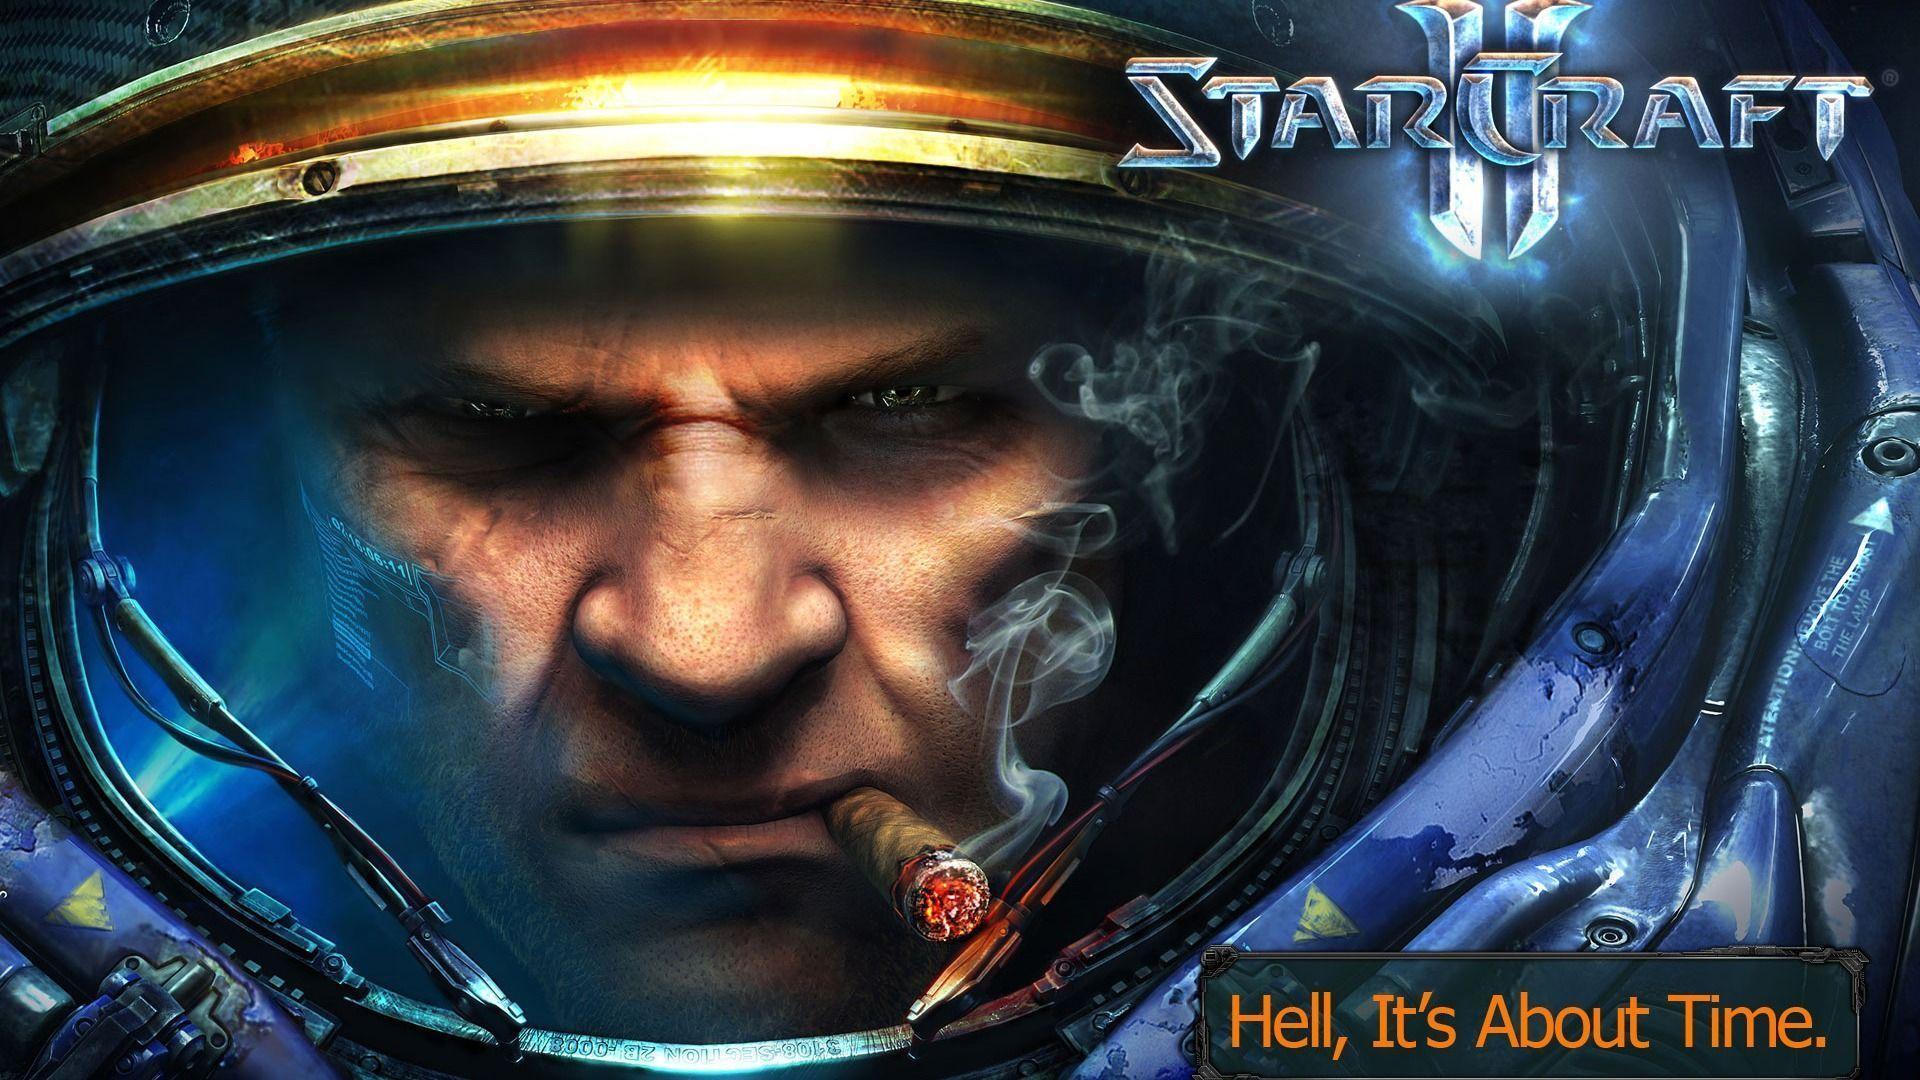 Starcraft 2 Desktop Pc And Mac Wallpaper Picture to